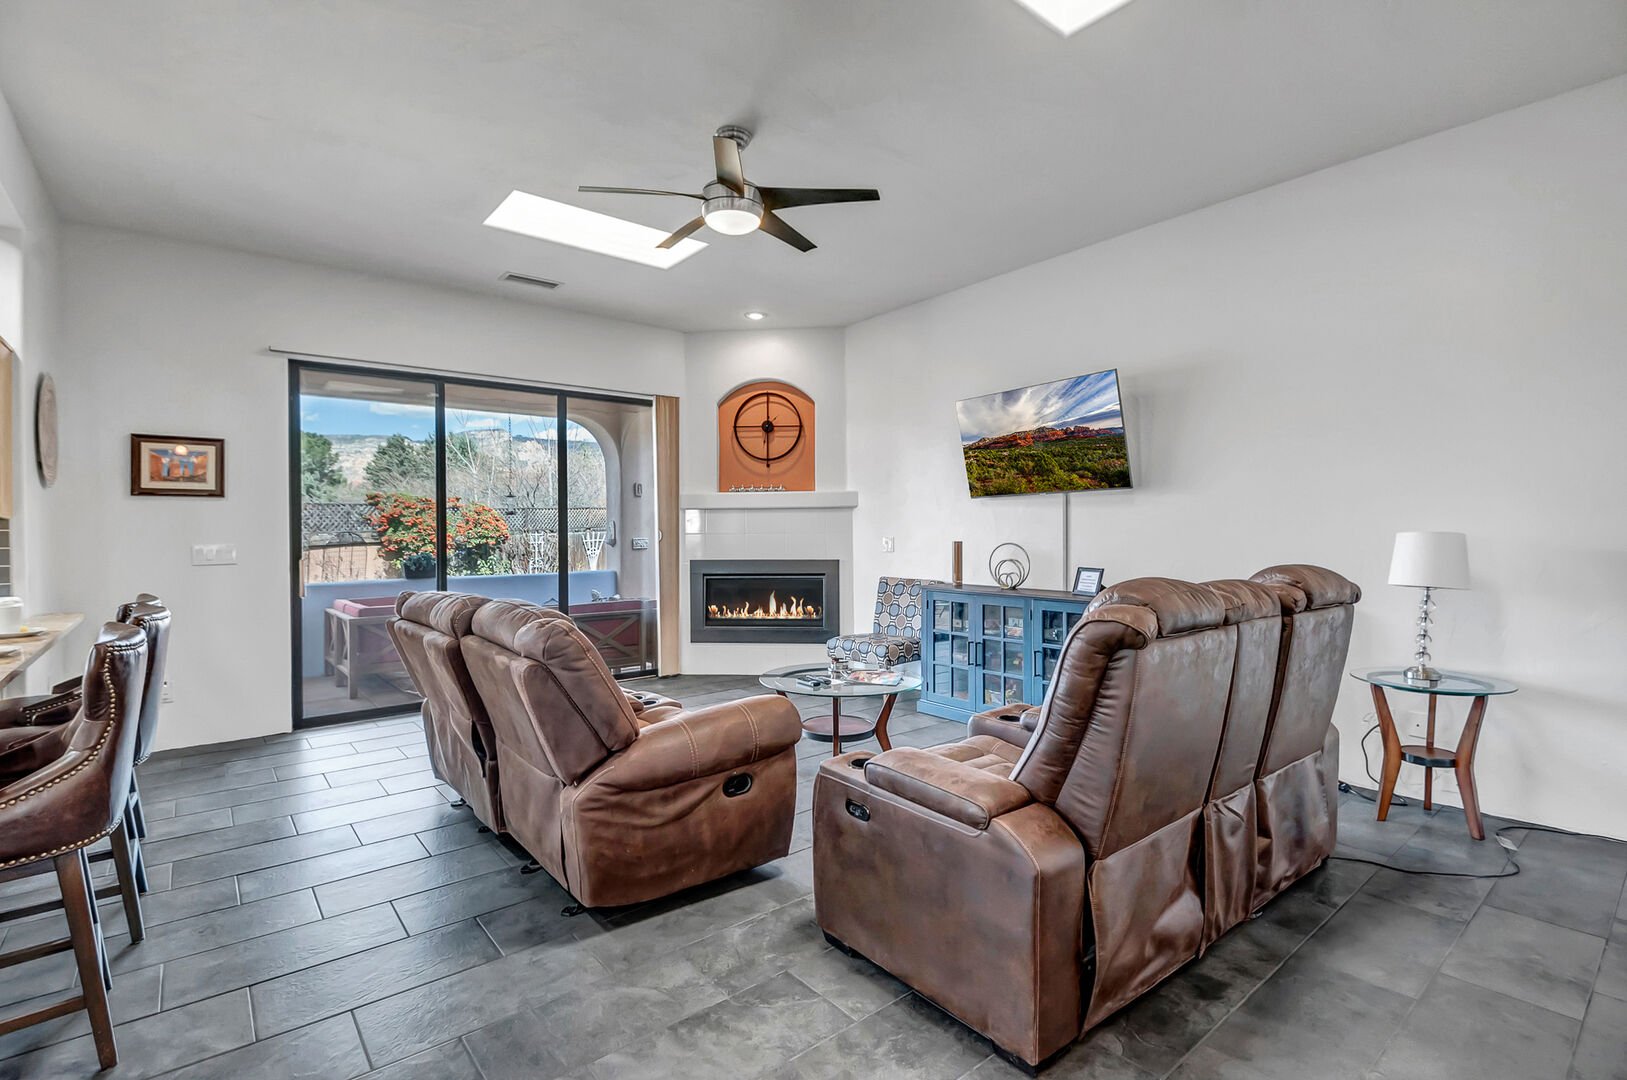 Family Room with a Smart TV and Patio Access